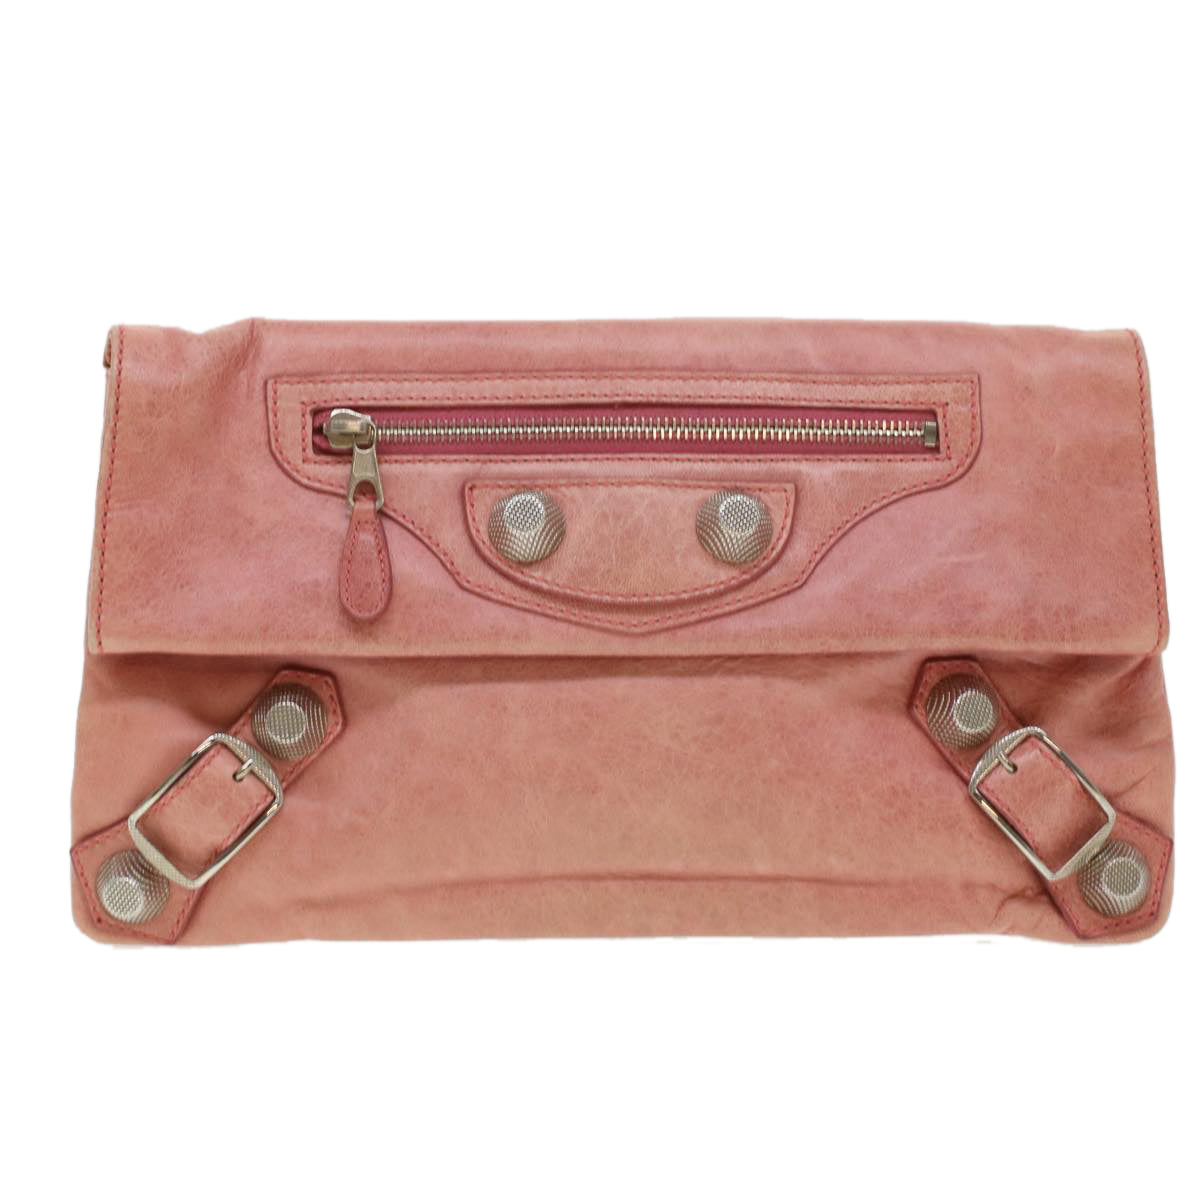 BALENCIAGA Giant Envelope Clutch Clutch Bag Leather Pink 186182 Auth 41400